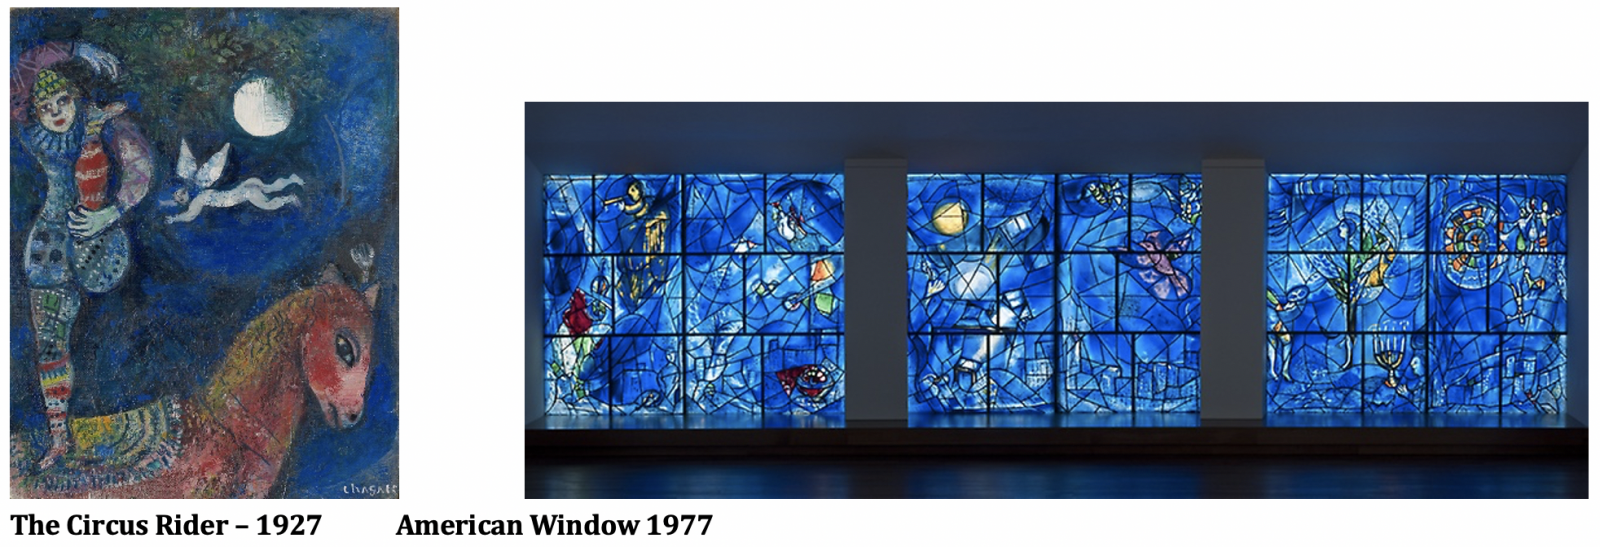 Chagall paintings